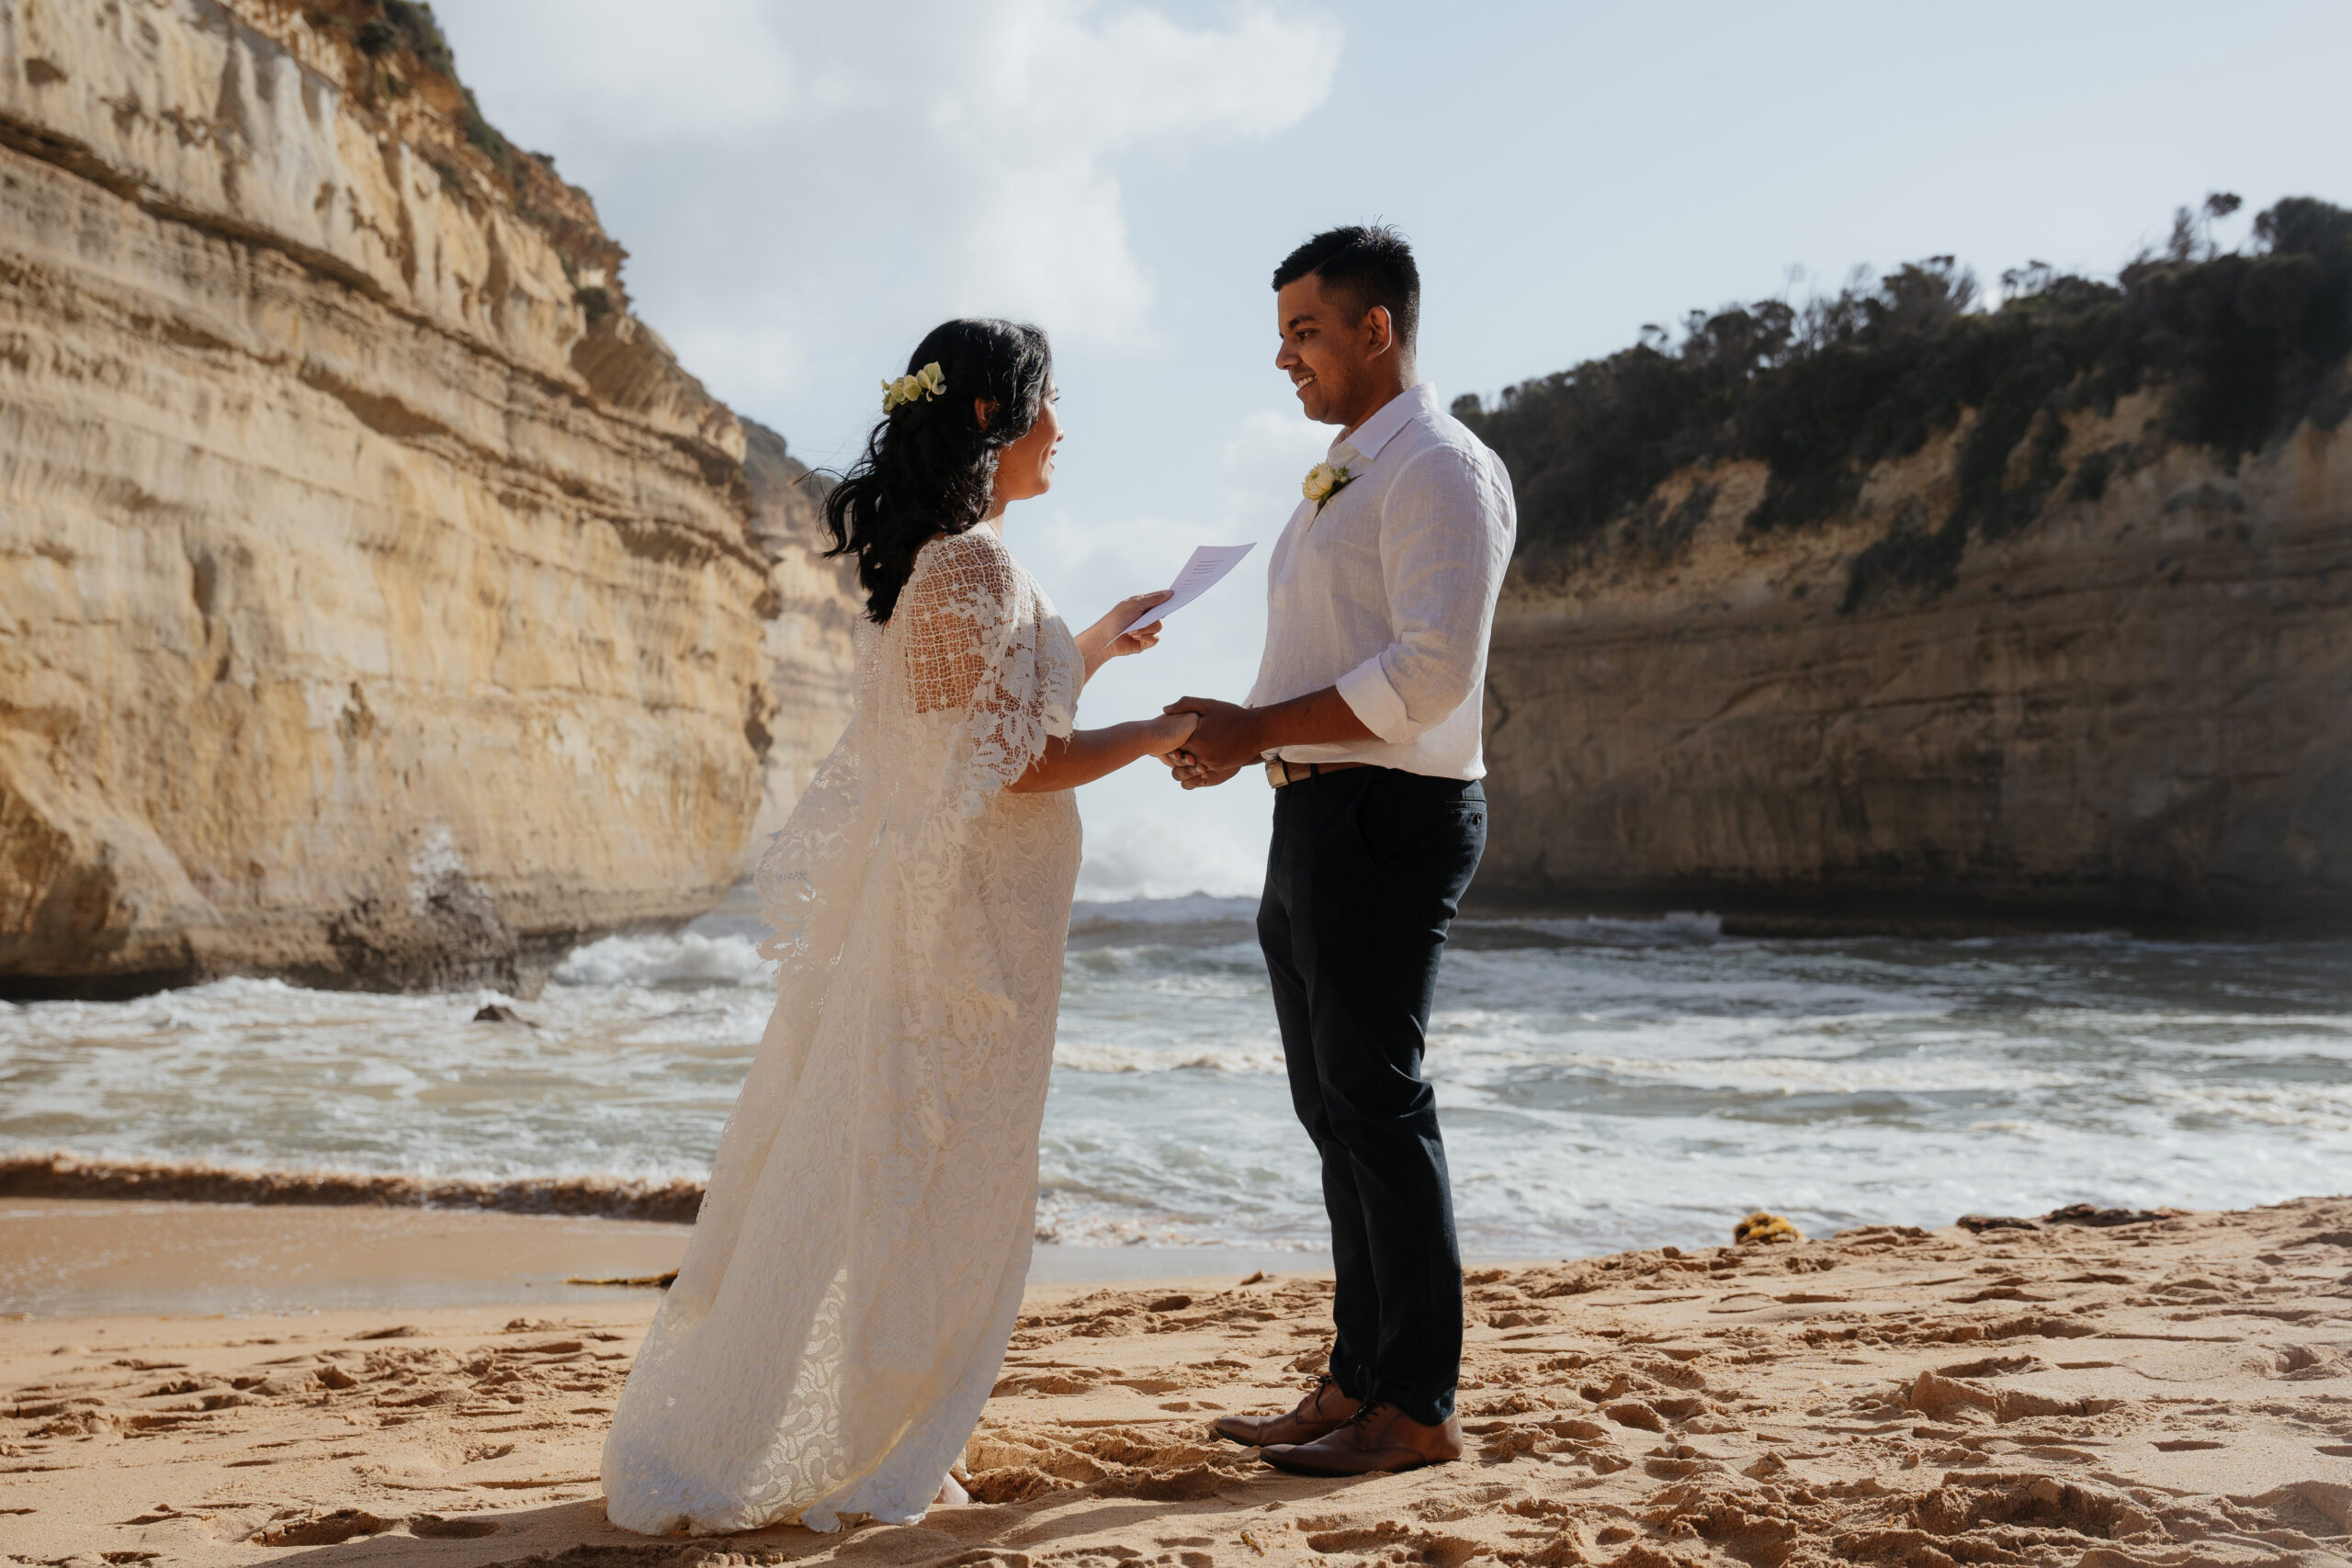 A couple reading vows during their elopement on the beach